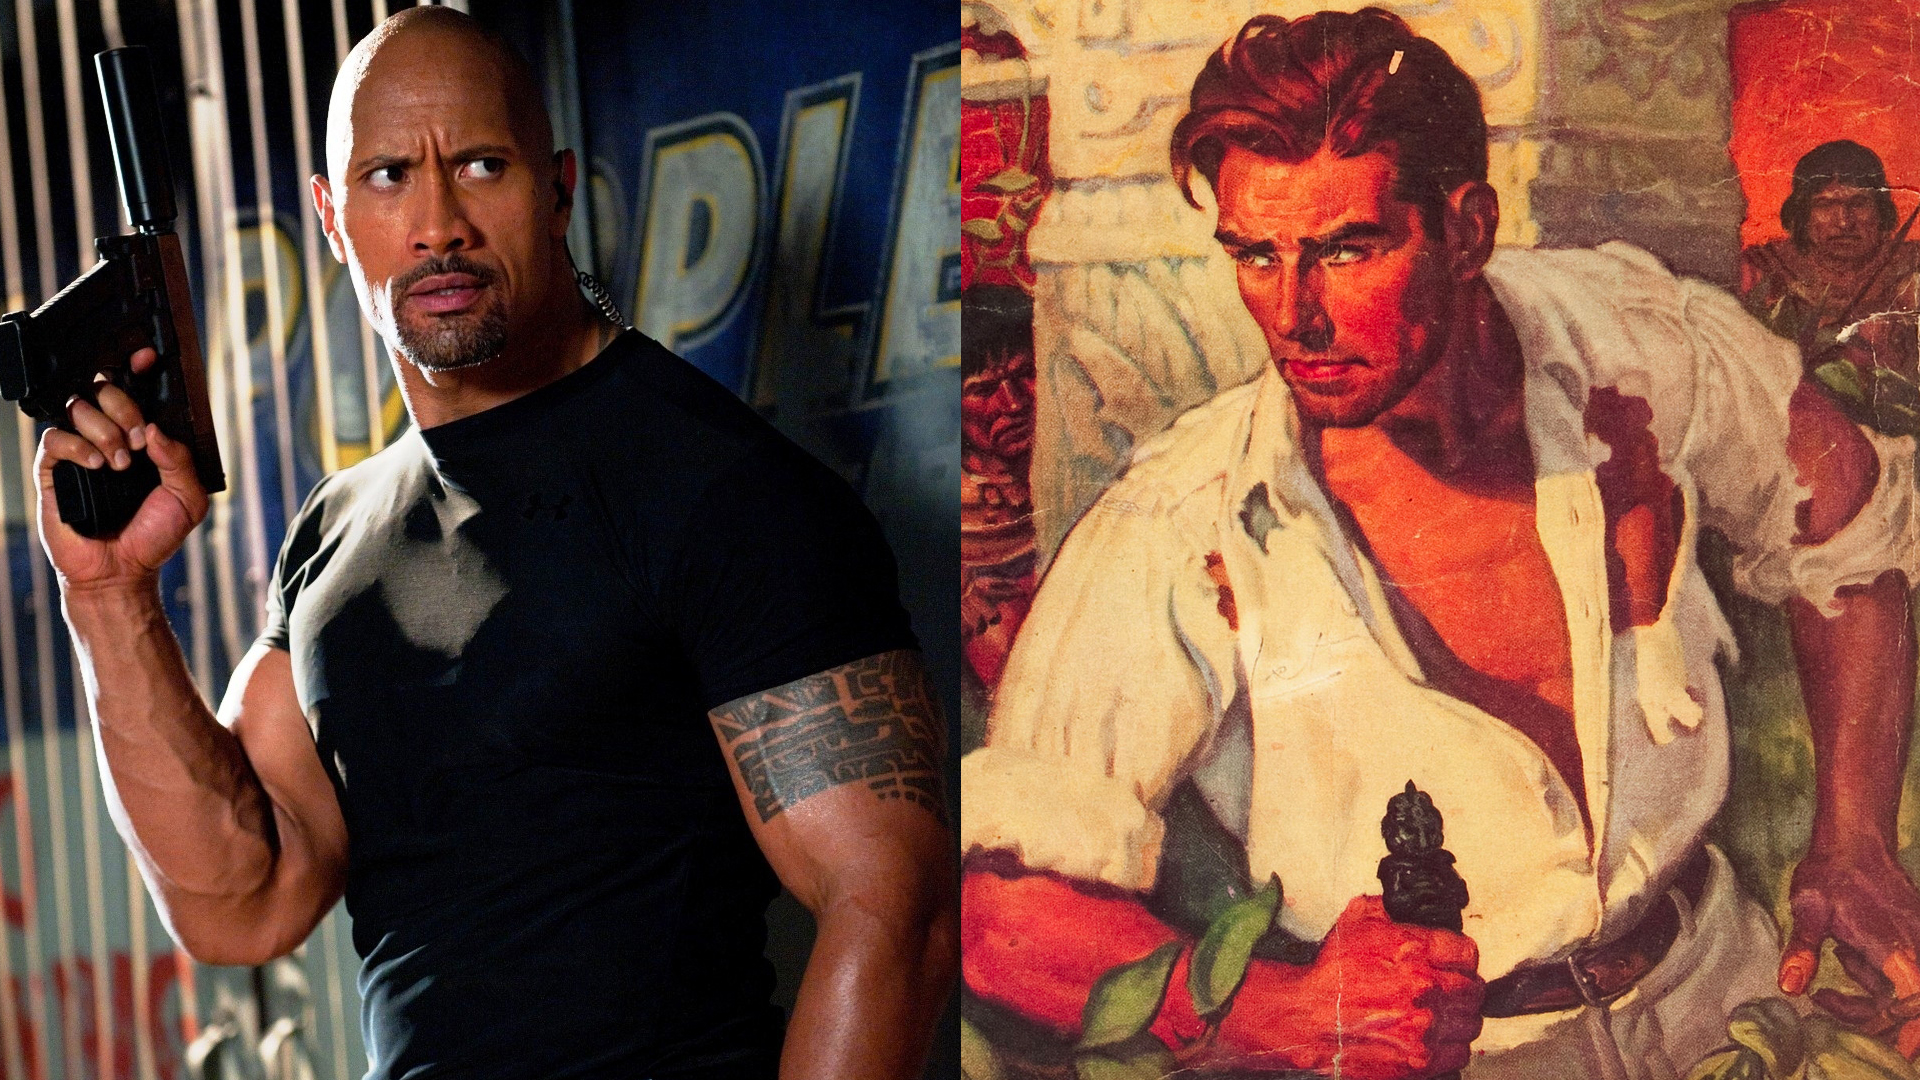 Dwayne Johnson Confirms Starring Role in Shane Black's DOC SAVAGE.